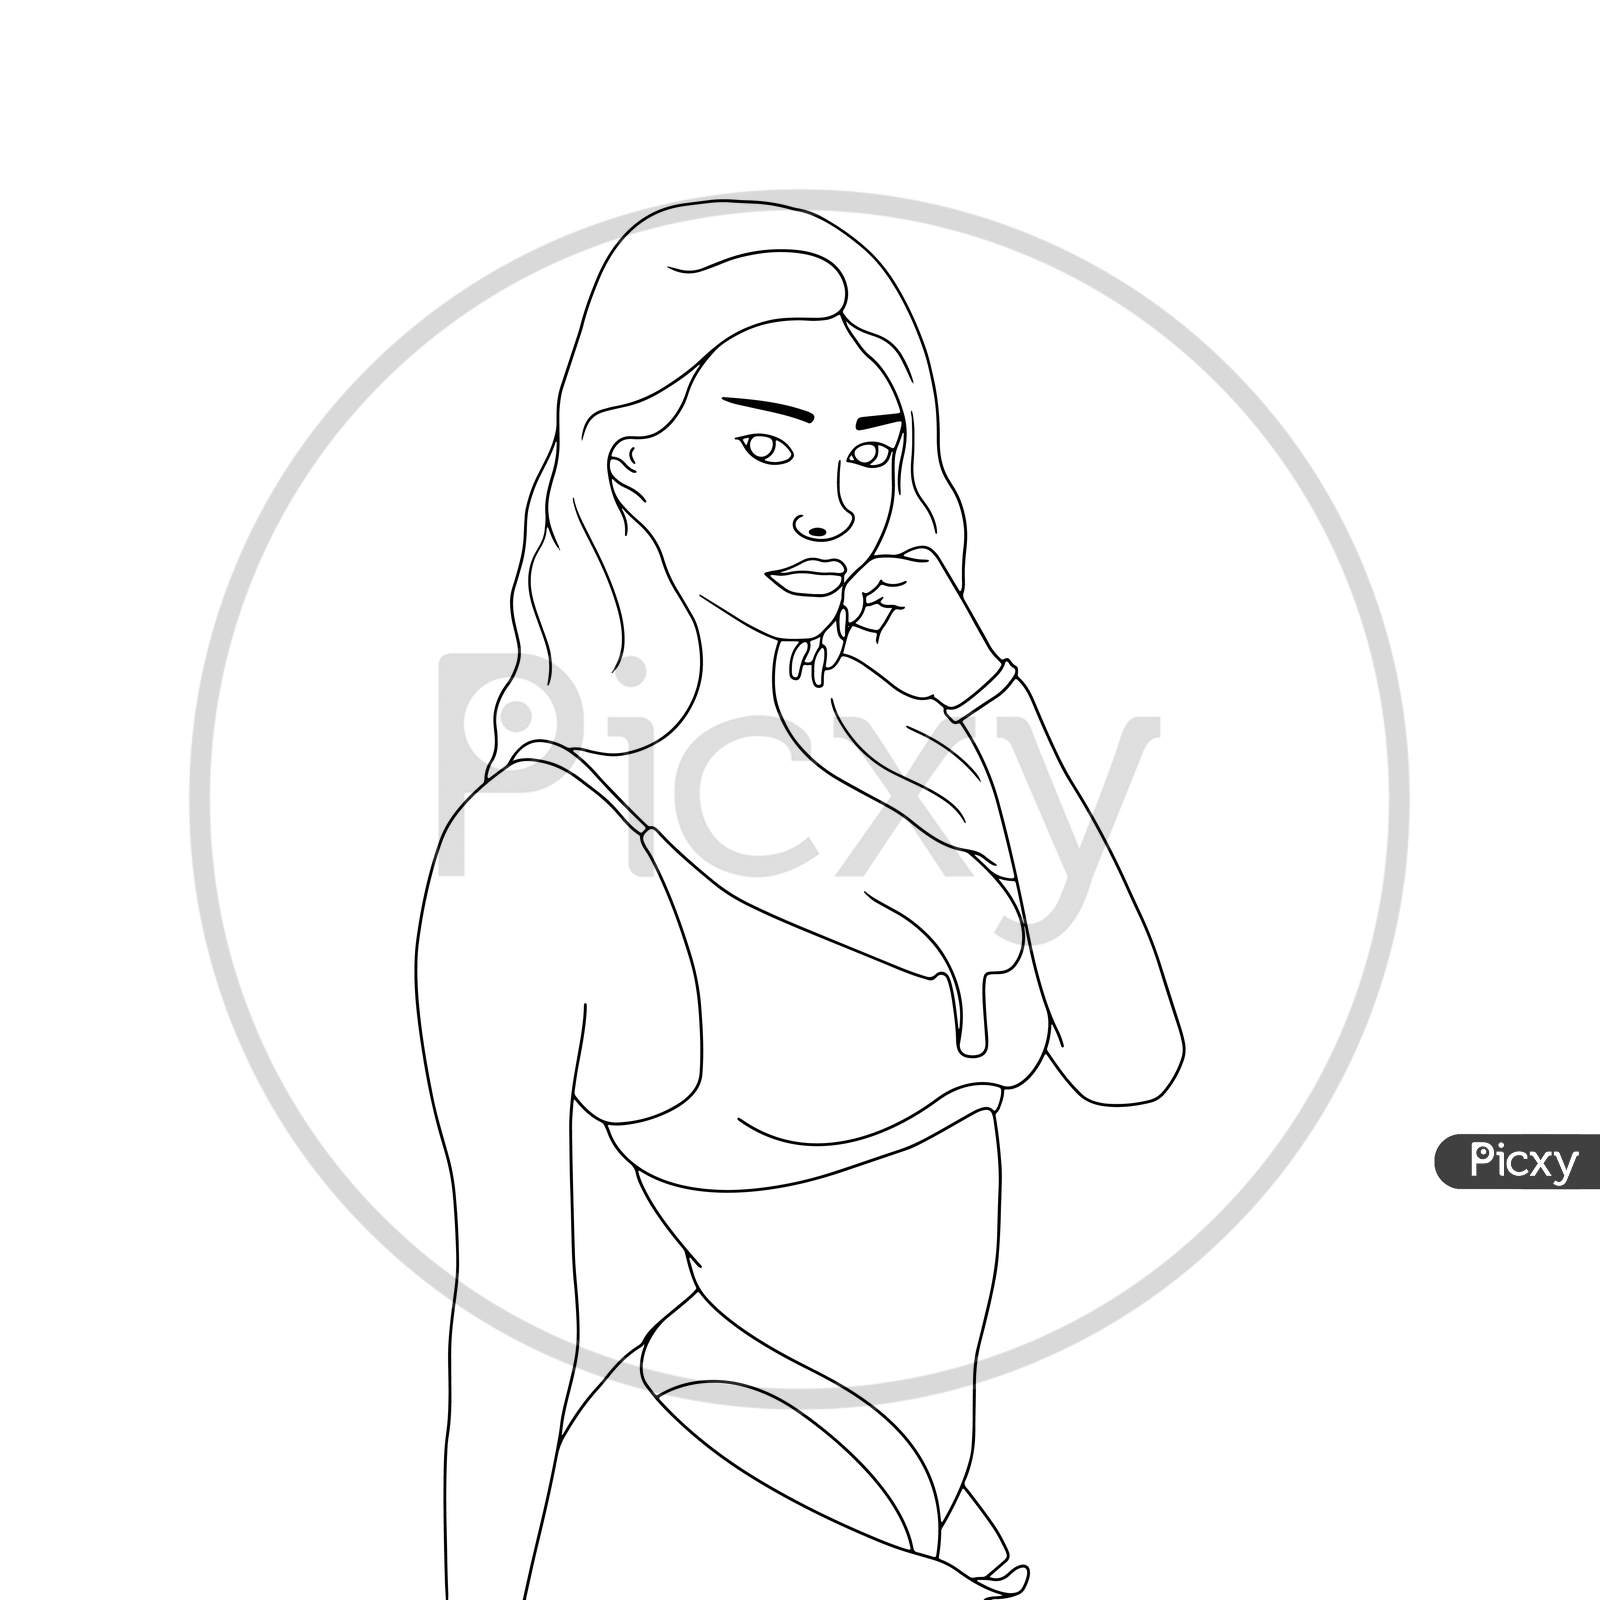 Coloring Pages - Naughty Adult Girl - Hand Drawn Illustration On White Background